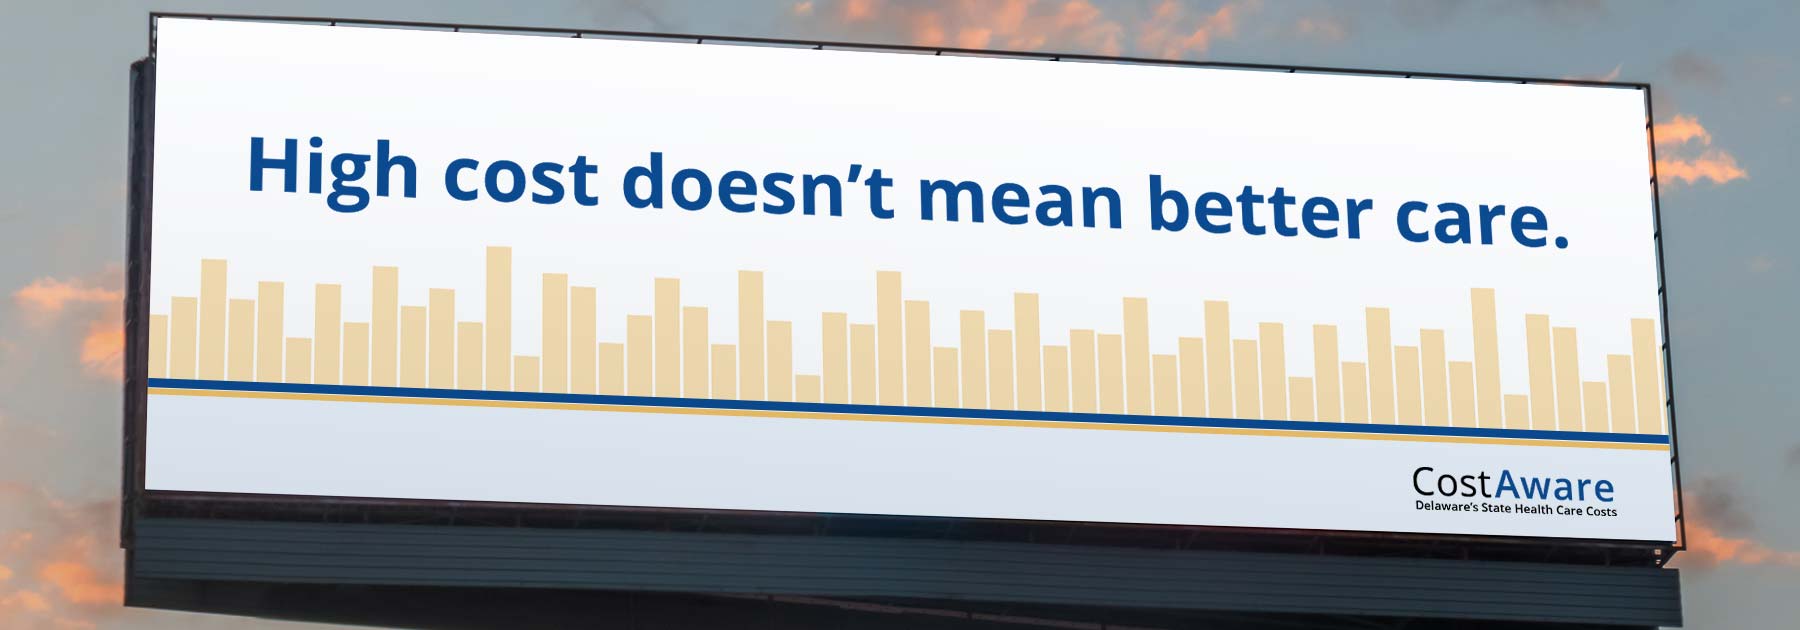 Billboard: High cost doesn't mean better care.